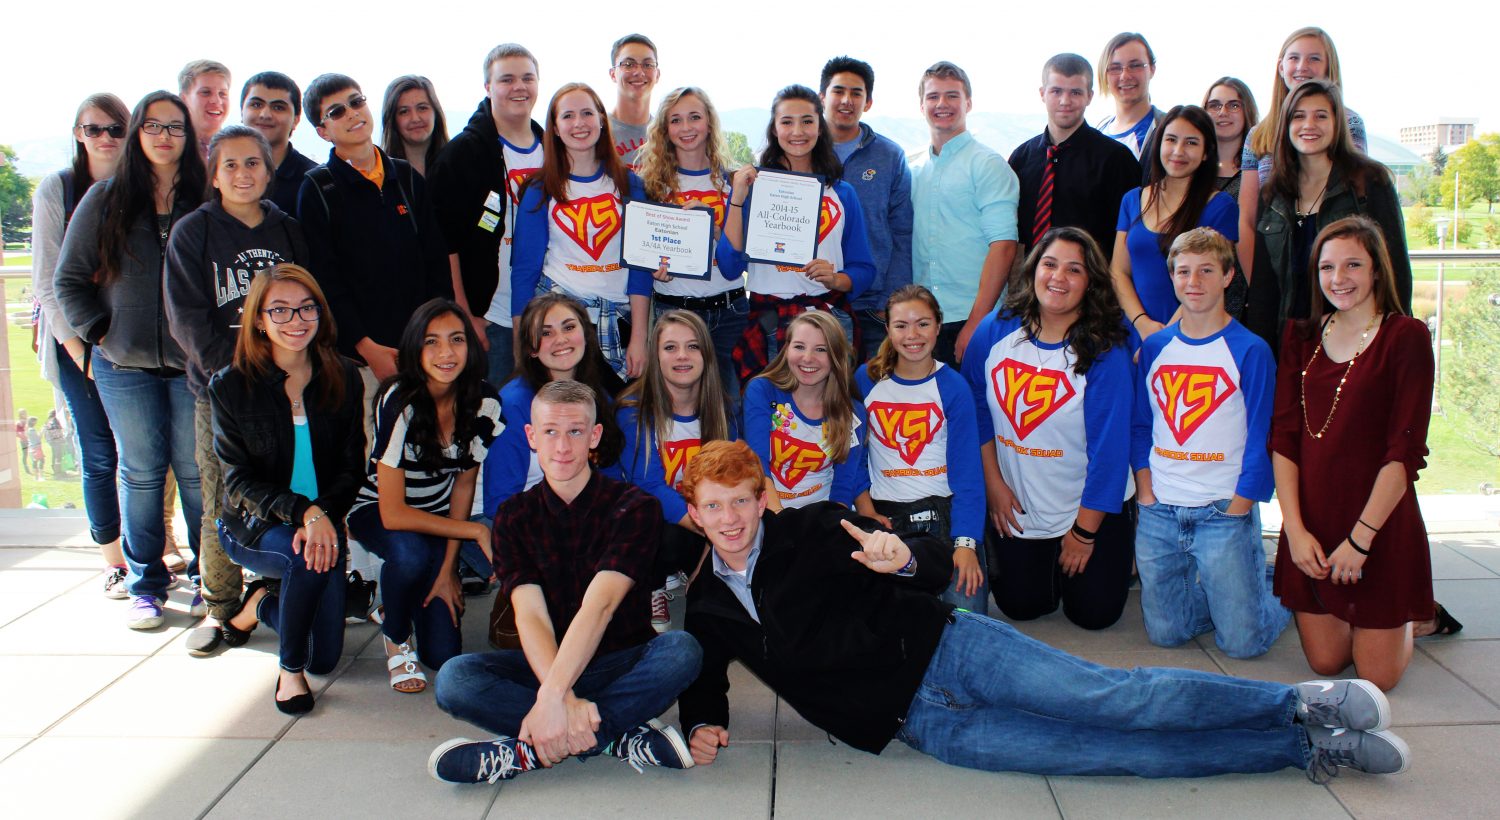 The yearbook staff, newspaper staff and the Journalism One class after the awards. Photo courtesy of Merri Kirby